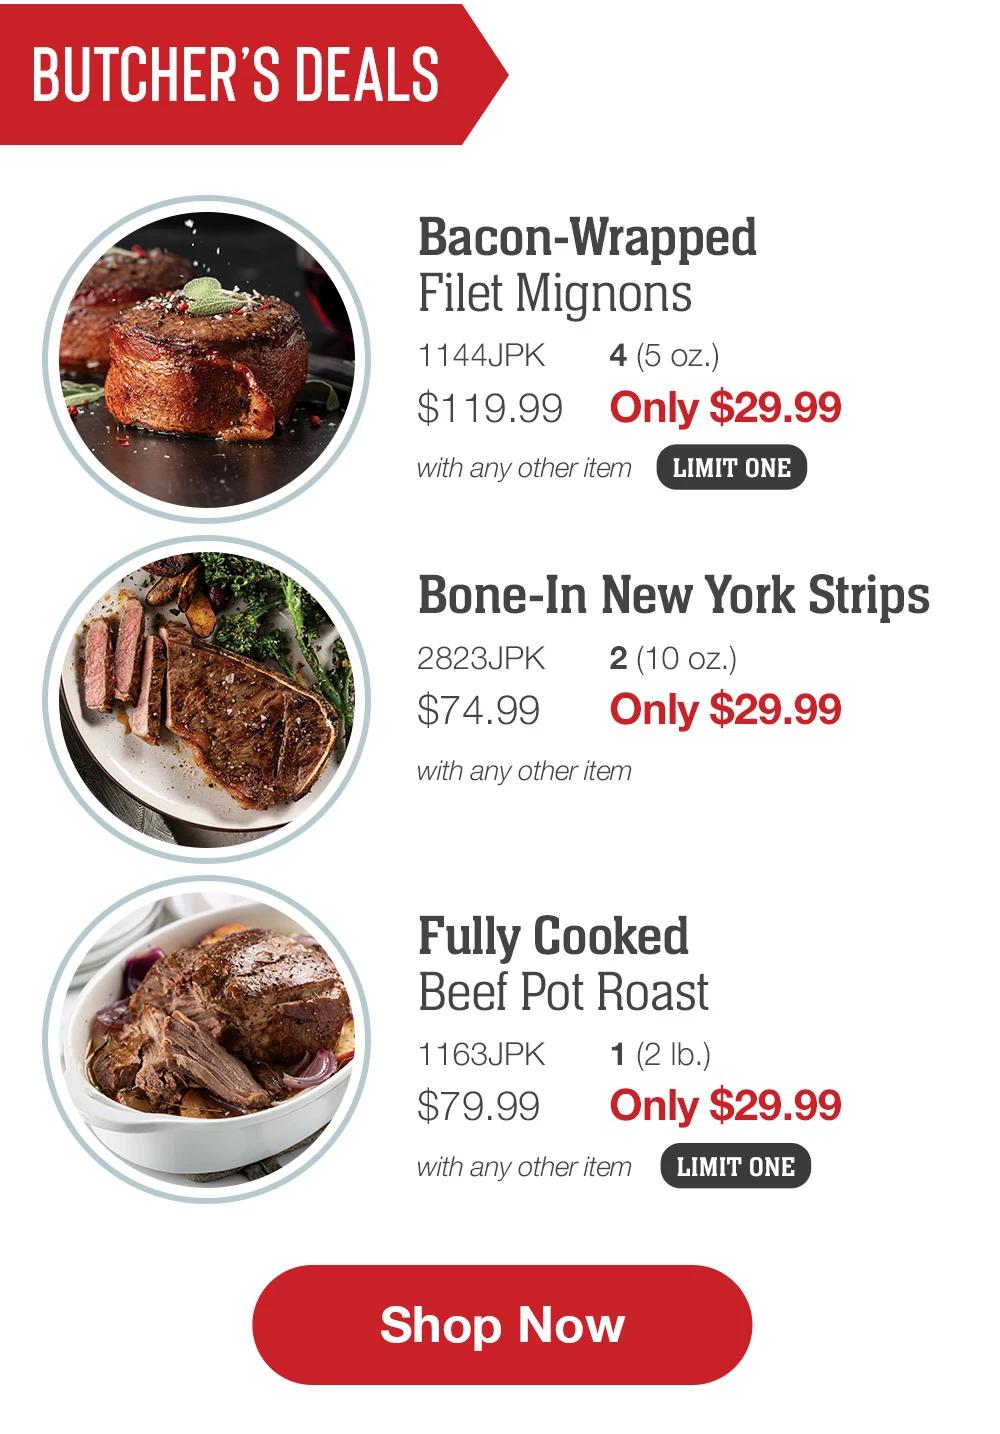 Butcher's Deals | Bacon-Wrapped Filet Mignons - 1144JPK 4 (5 oz.) $119.99 Only $29.99 with any other item LIMIT ONE | Bone-In New York Strips - 2823JPK 2 (10 oz.) $74.99 Only $29.99 with any other item | Fully Cooked Beef Pot Roast - 1163JPK 1 (2 Ib.) $79.99 Only $29.99 with any other item LIMIT ONE || Shop Now